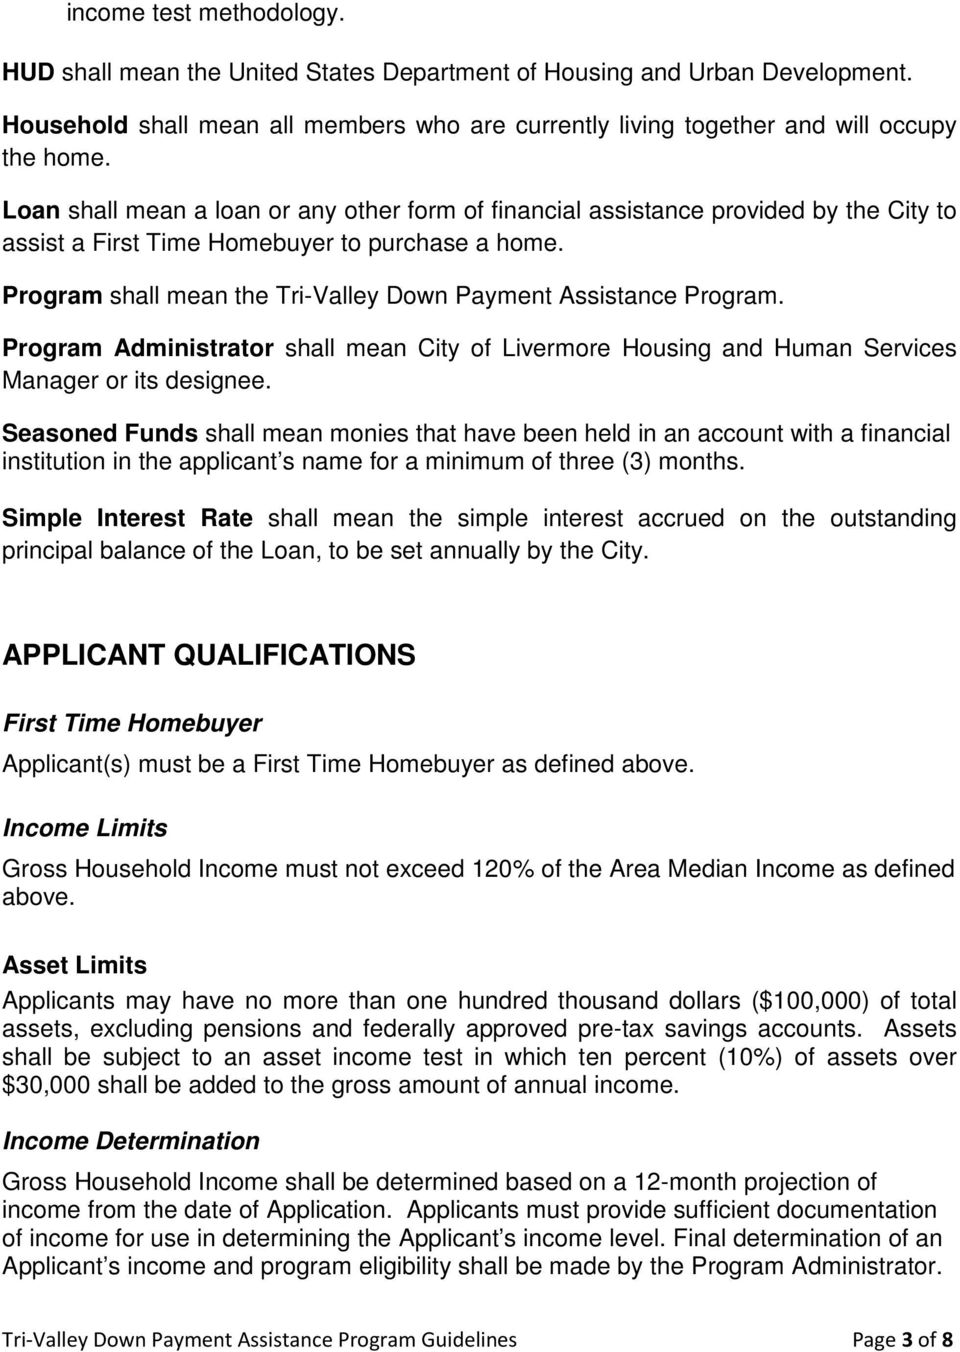 Program shall mean the Tri-Valley Down Payment Assistance Program. Program Administrator shall mean City of Livermore Housing and Human Services Manager or its designee.